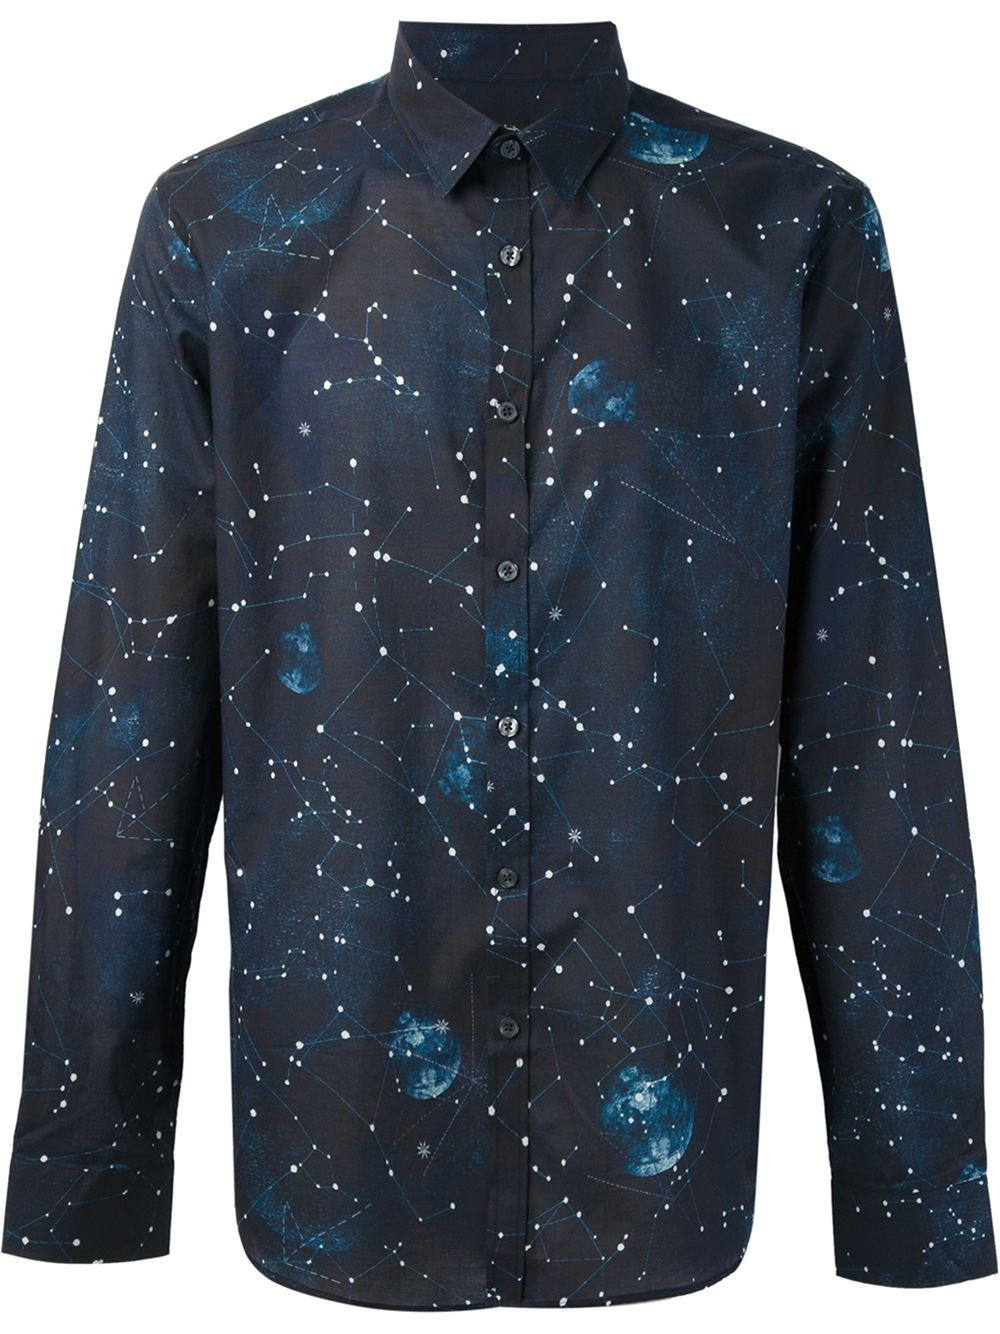 Paul smith Constellation Print Shirt in Blue for Men | Lyst